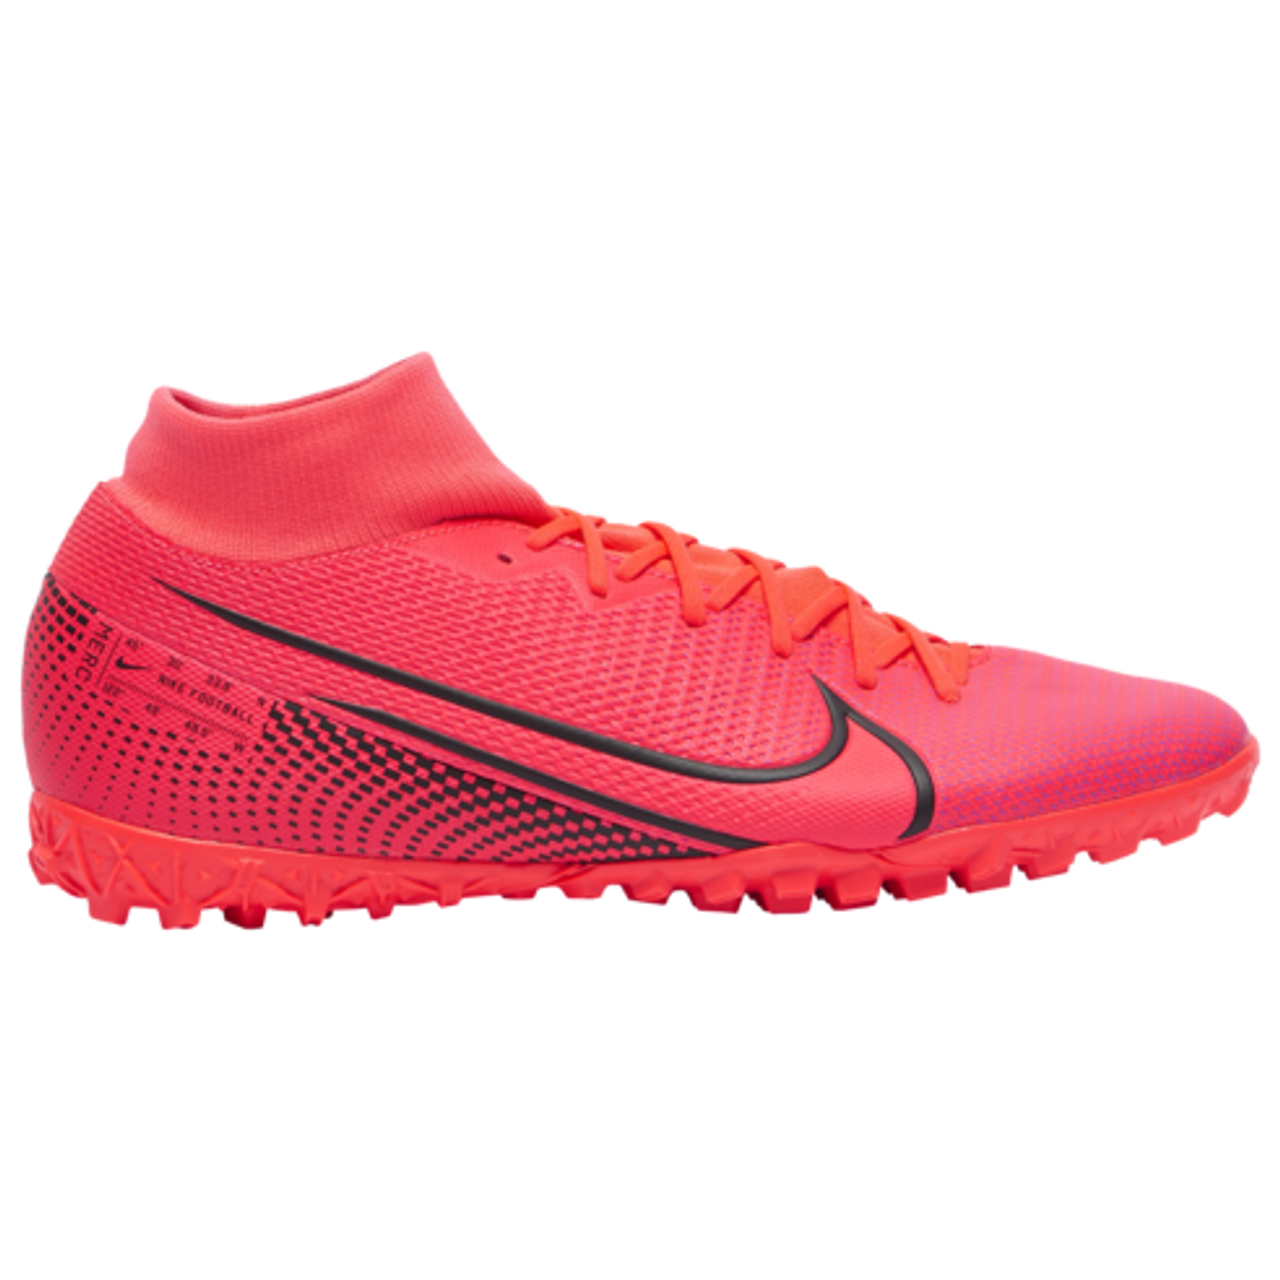 MERCURIAL SUPERFLY 7 ACADEMY MDS TF Soccer World For.